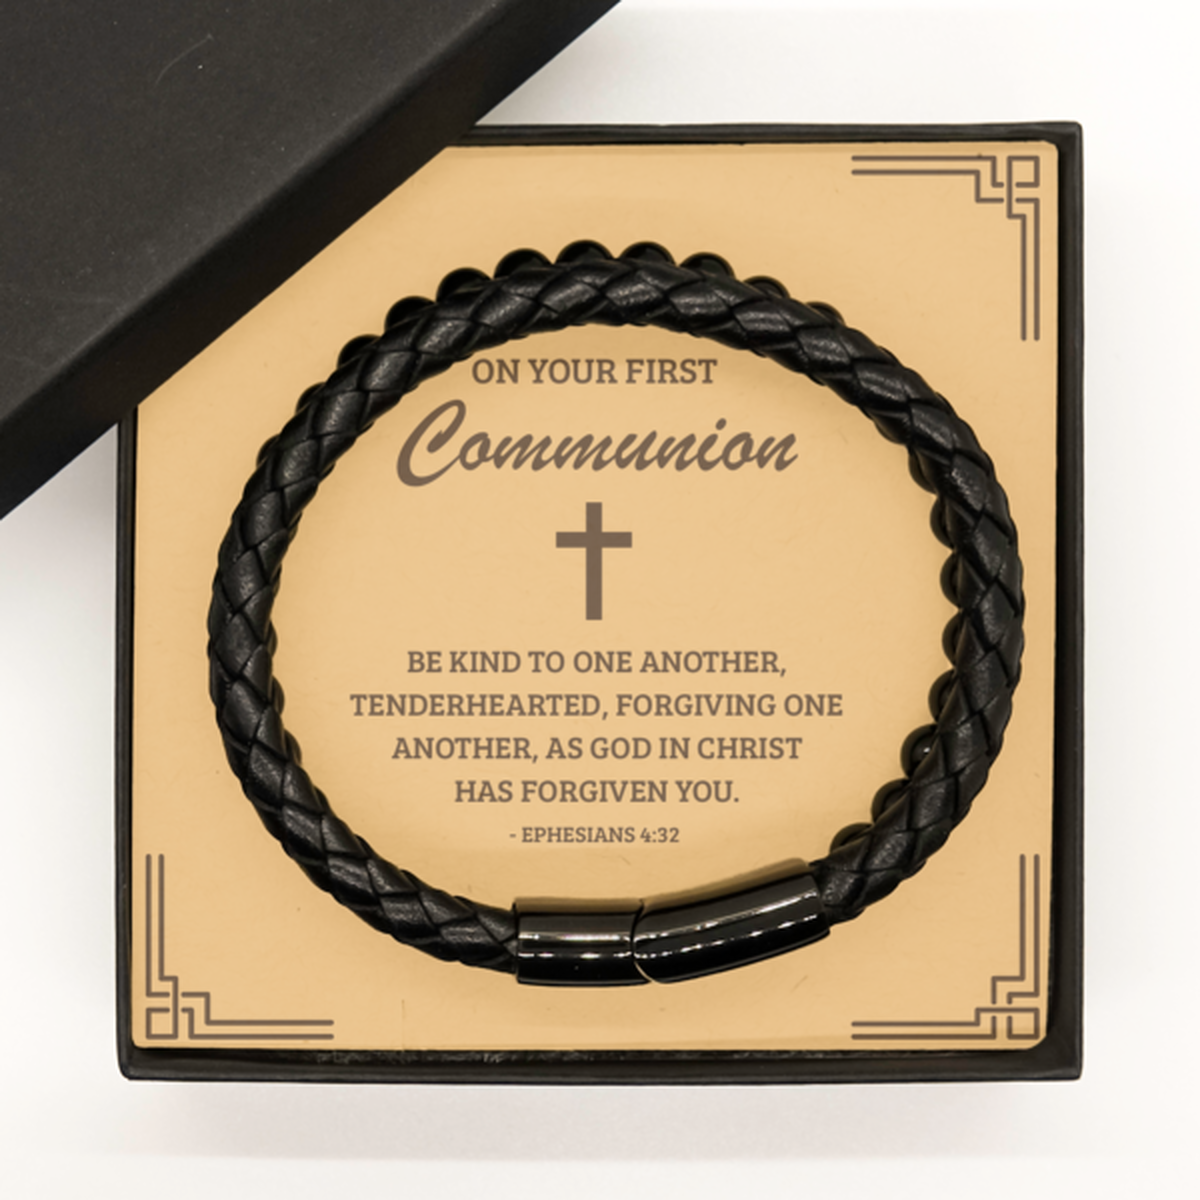 First Communion Gifts for Teenage Boys, Be kind to one another, Stone Leather Bracelet with Bible Verse Message Card, Religious Catholic Bracelet for Son, Grandson, Dad, Godfather